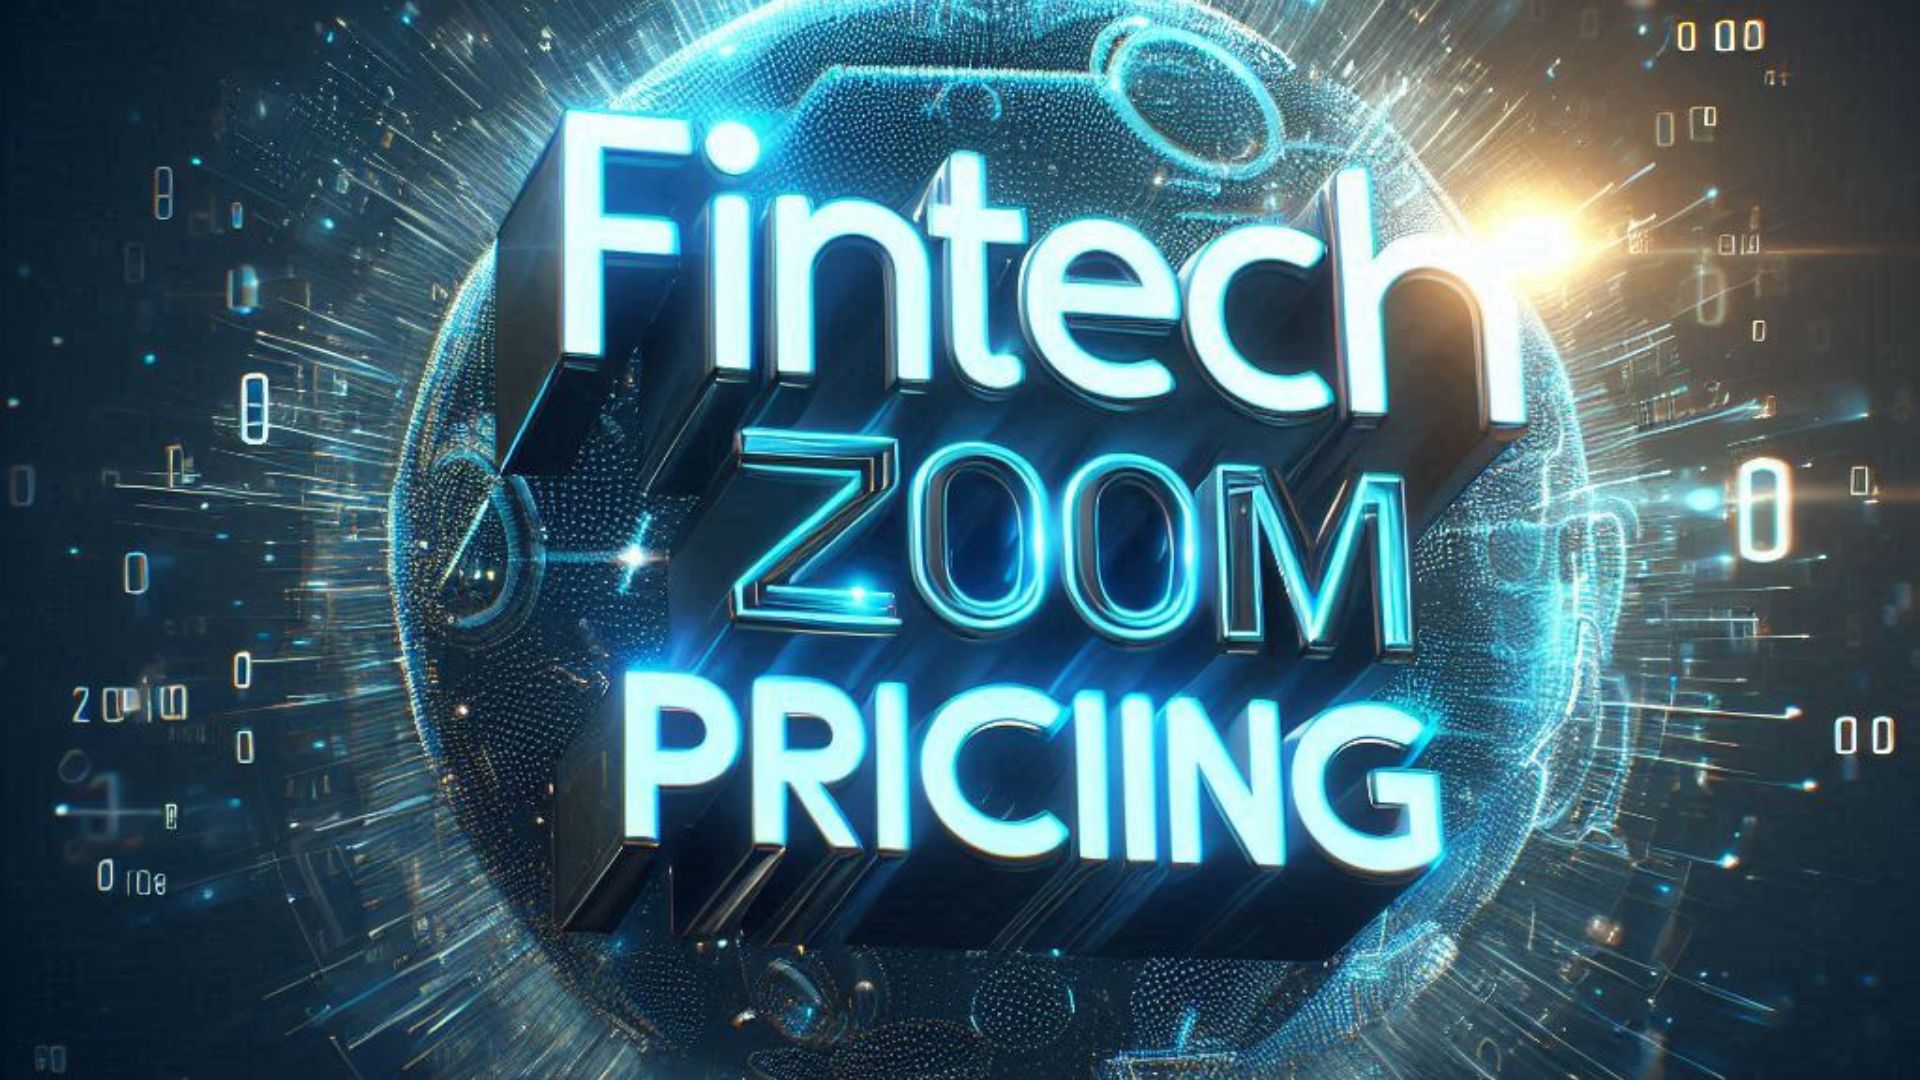 FINTECHZOOM PRICING